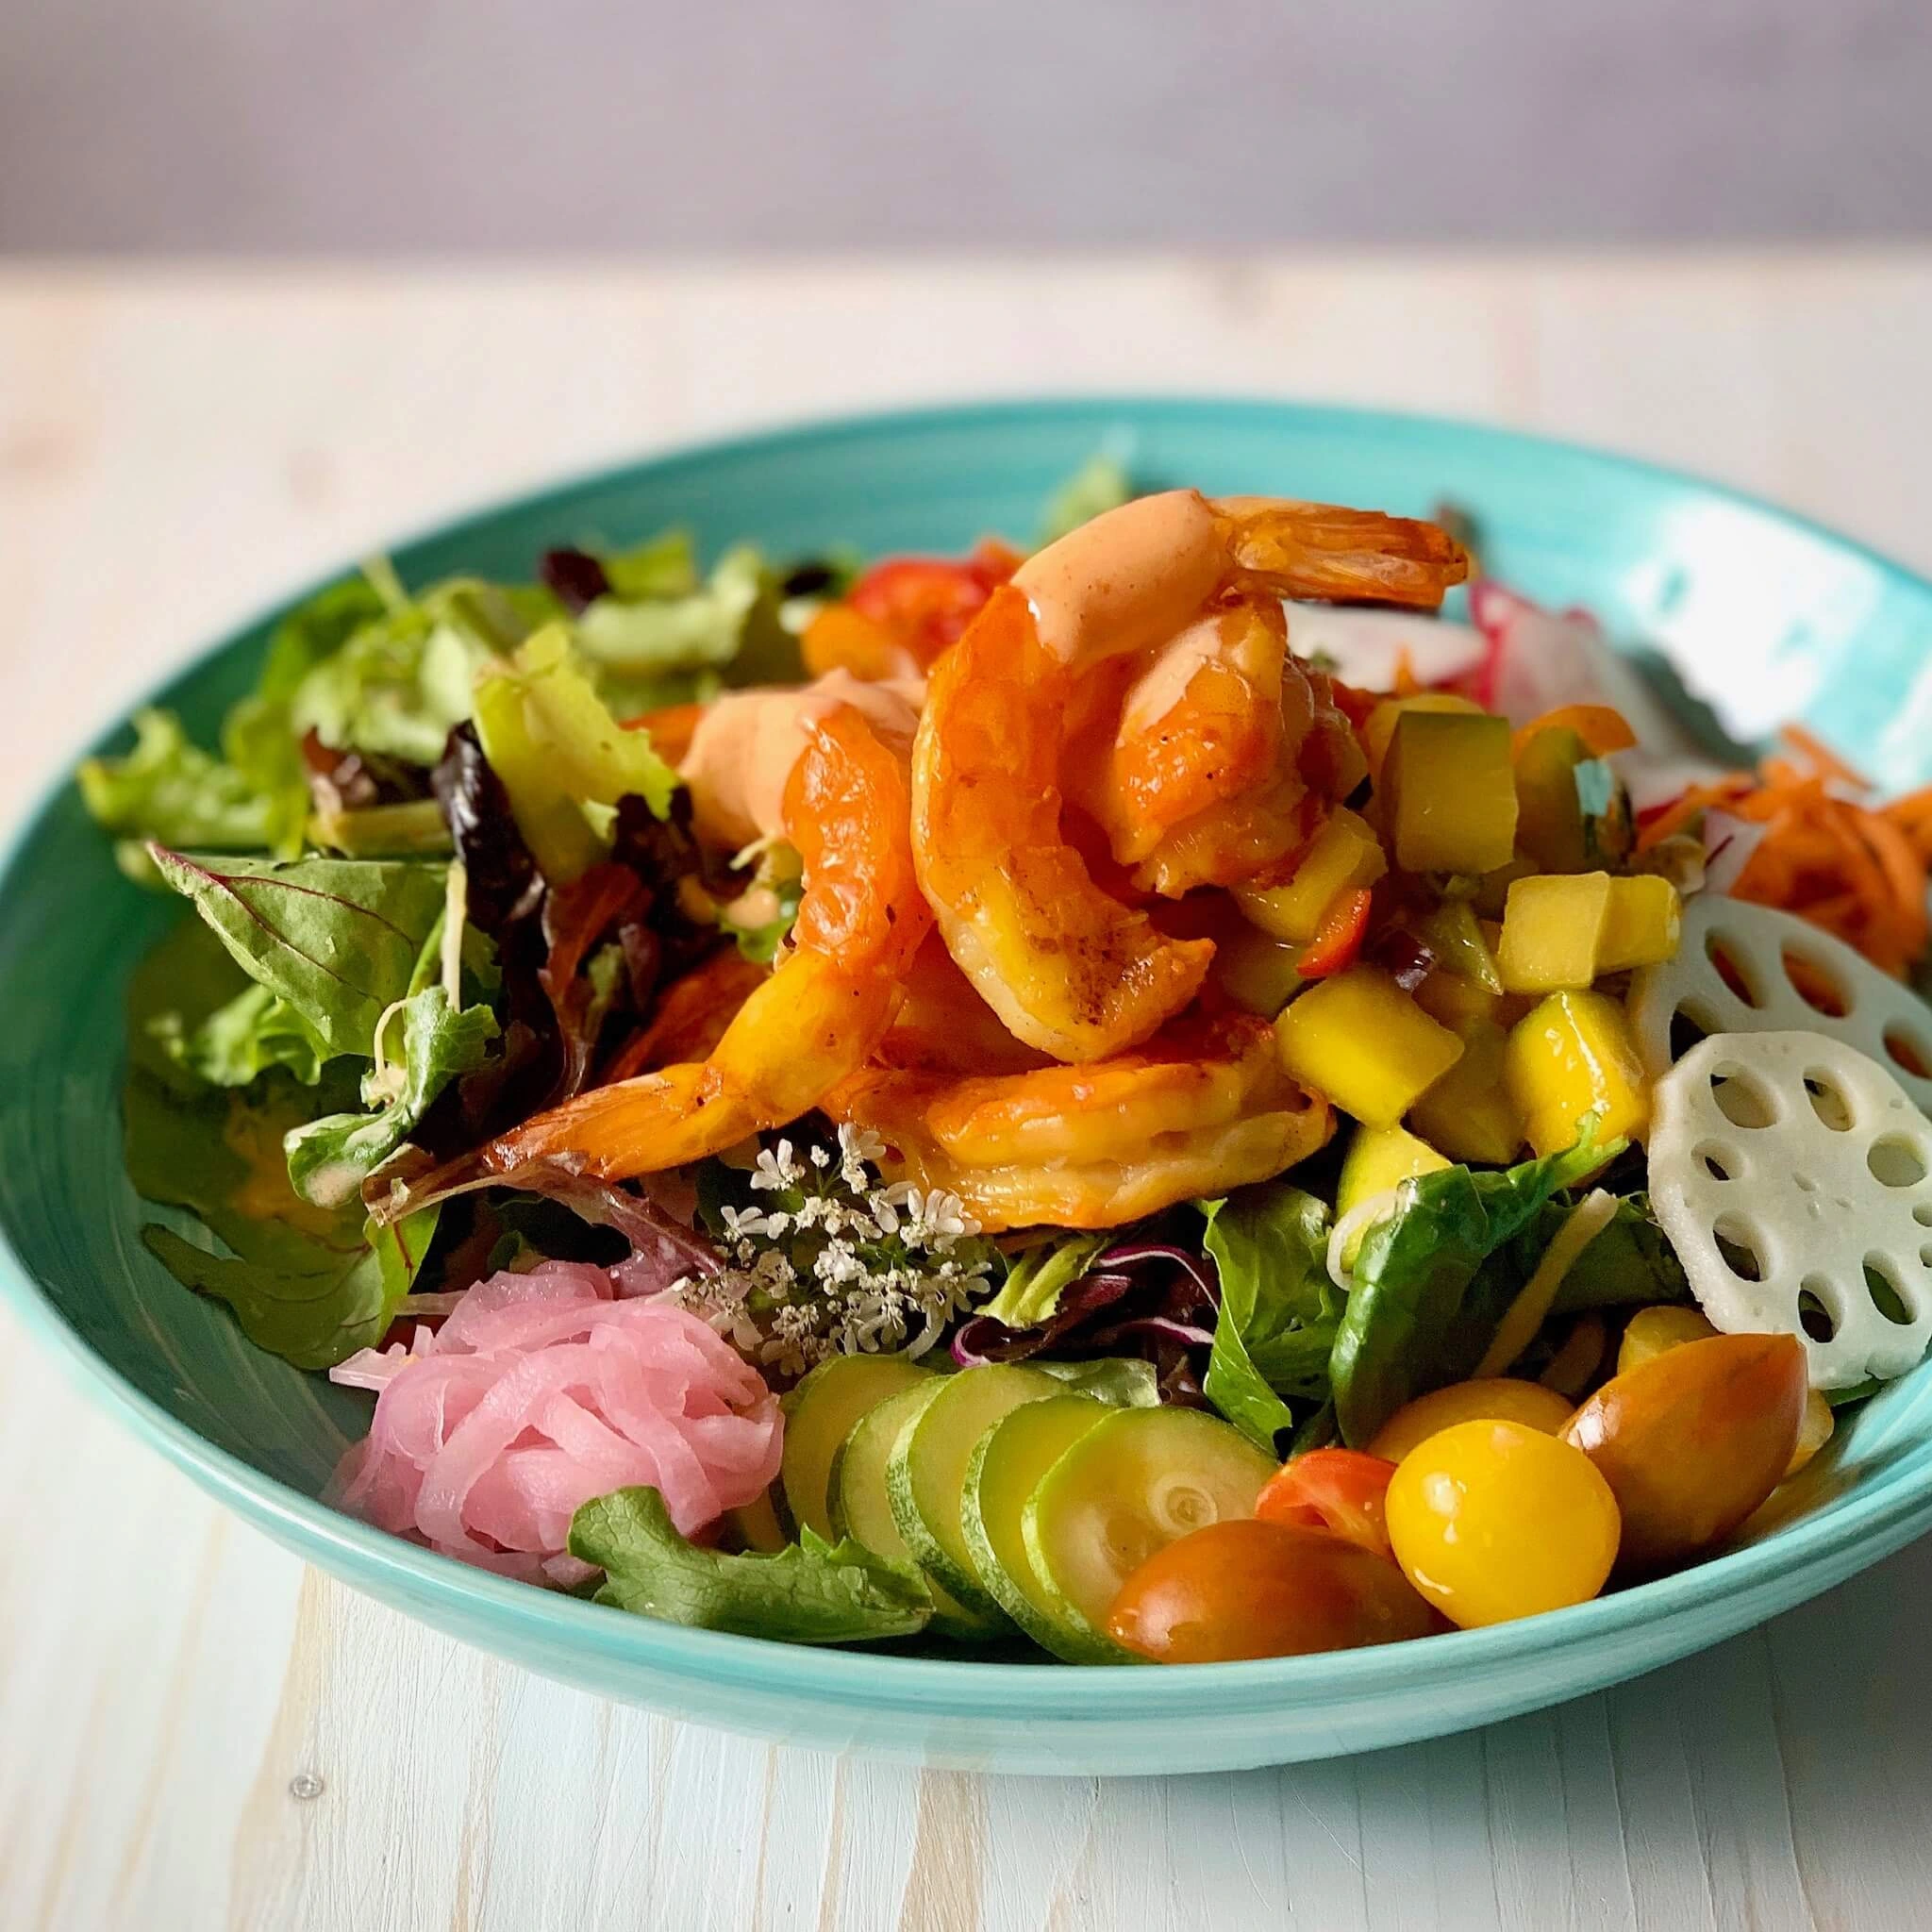 A bowl of salad with shrimp and vegetables in it.